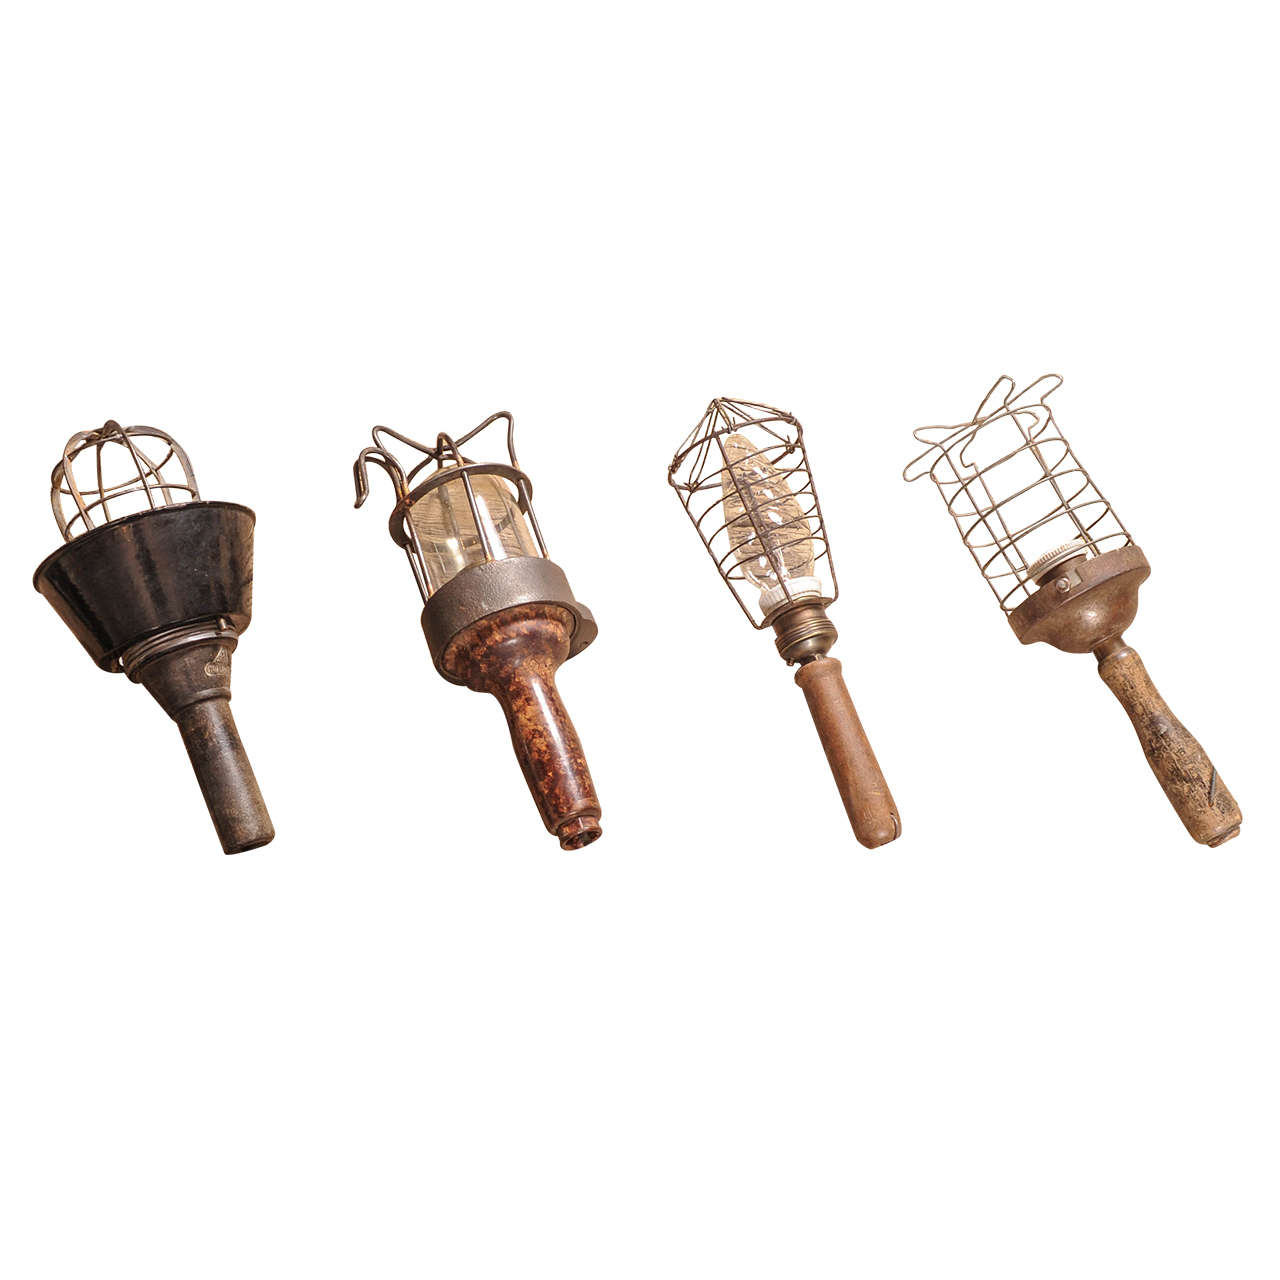 Collection of Four Different Cage Lights, Available Separately